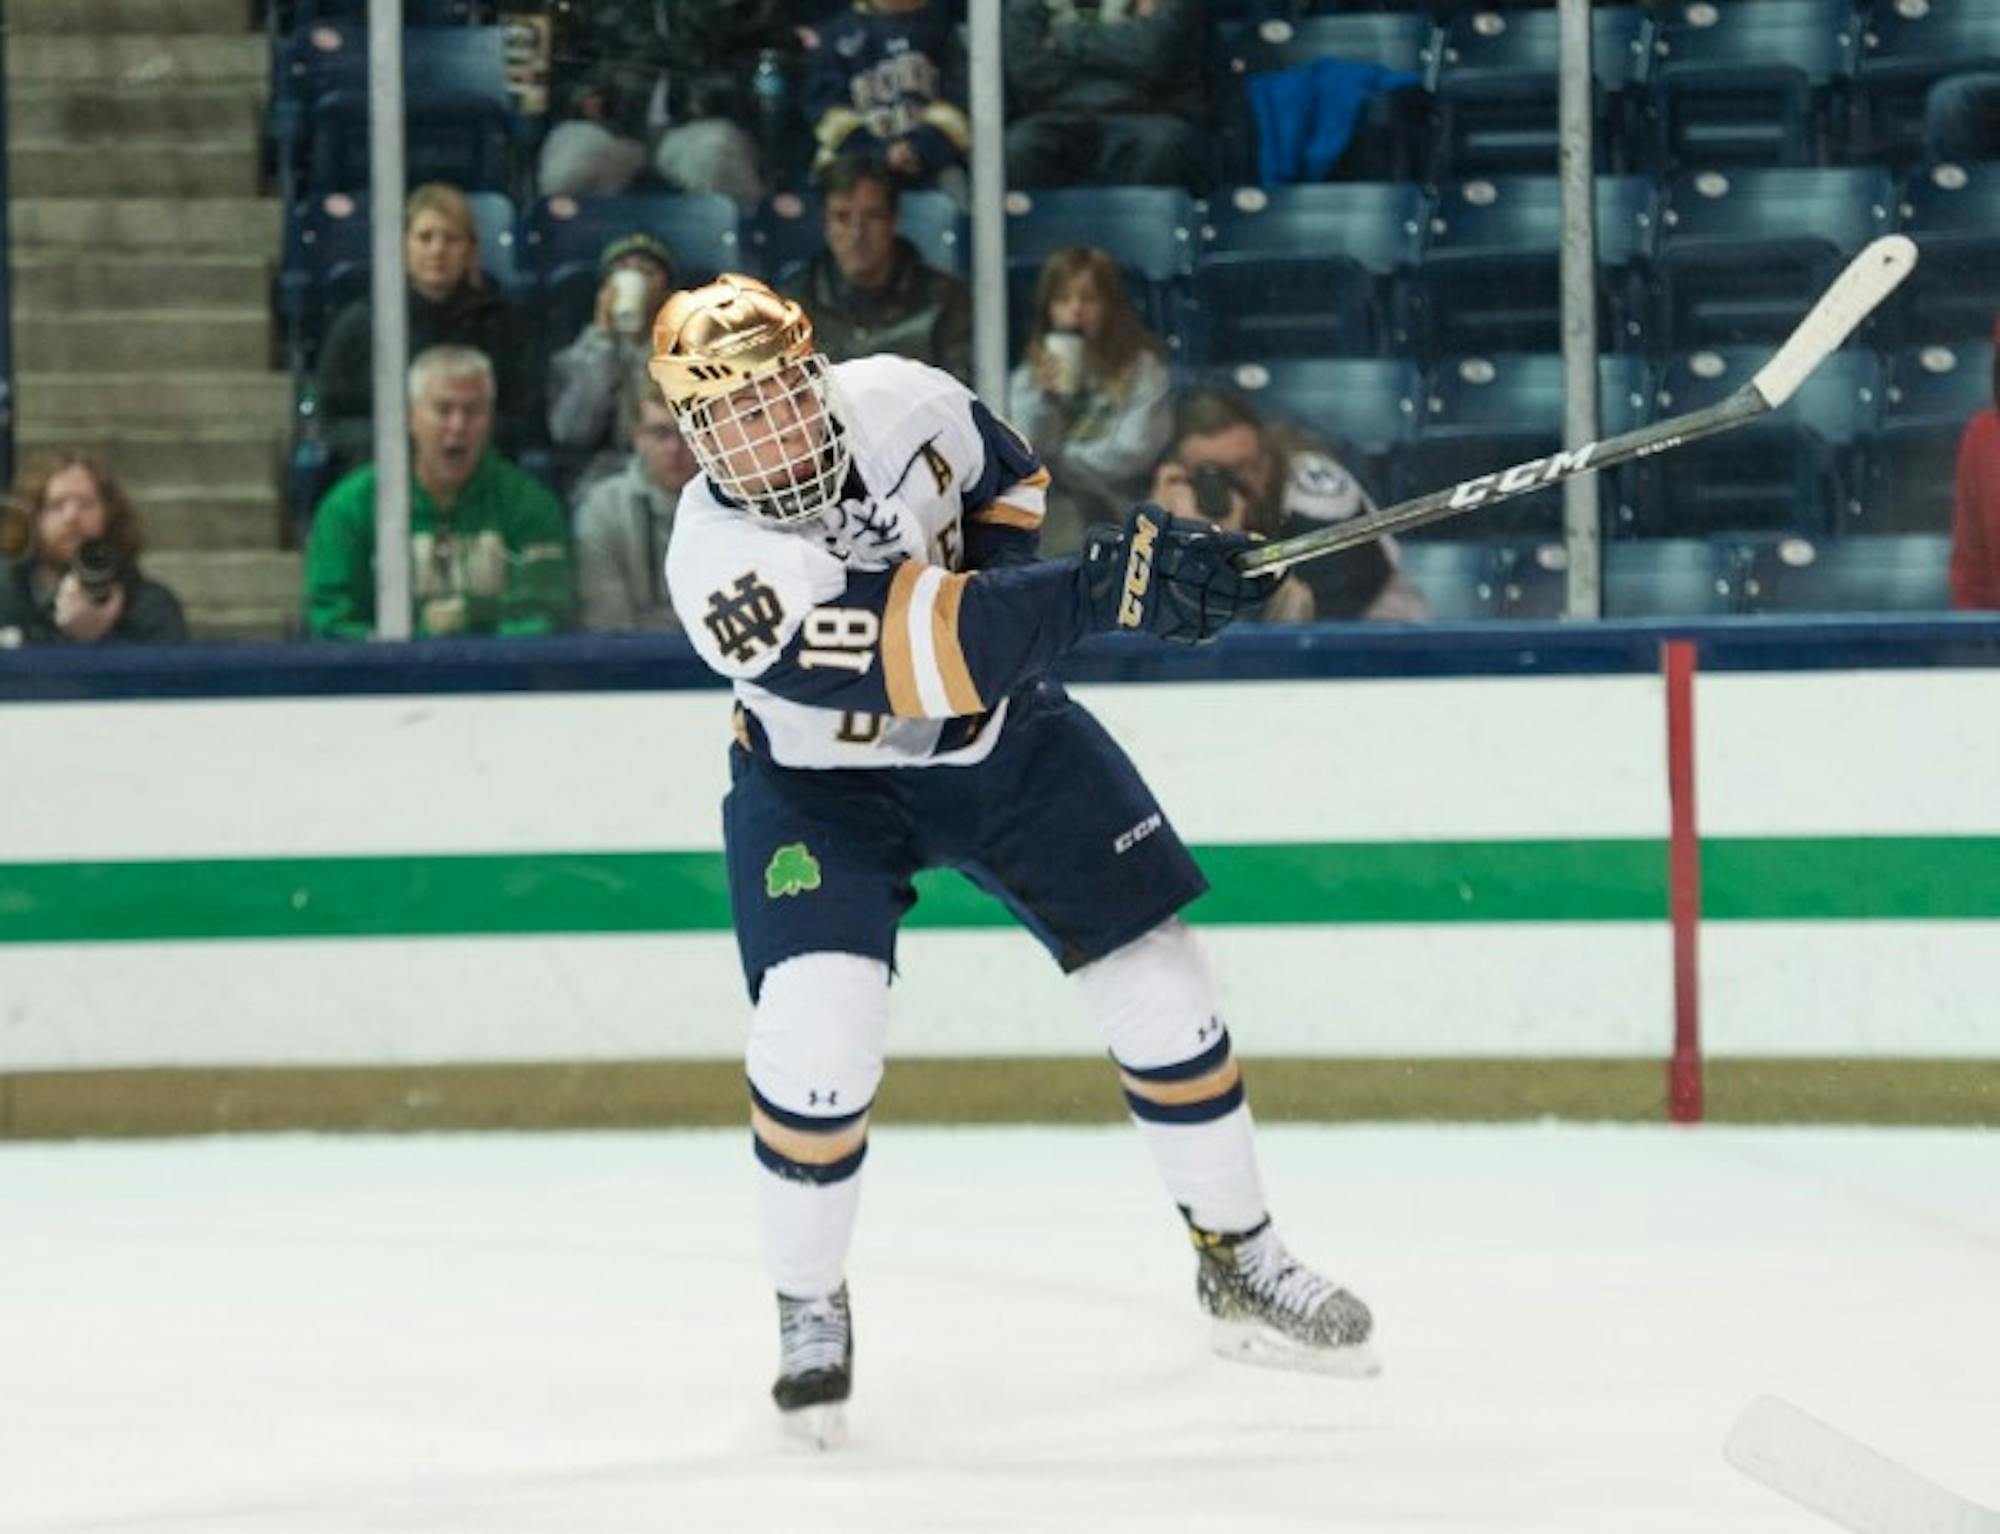 Irish junior forward Jake Evans sends the puck flying in Notre Dame’s 4-2 loss to UConn on Oct. 27 at Compton Family Ice Arena.